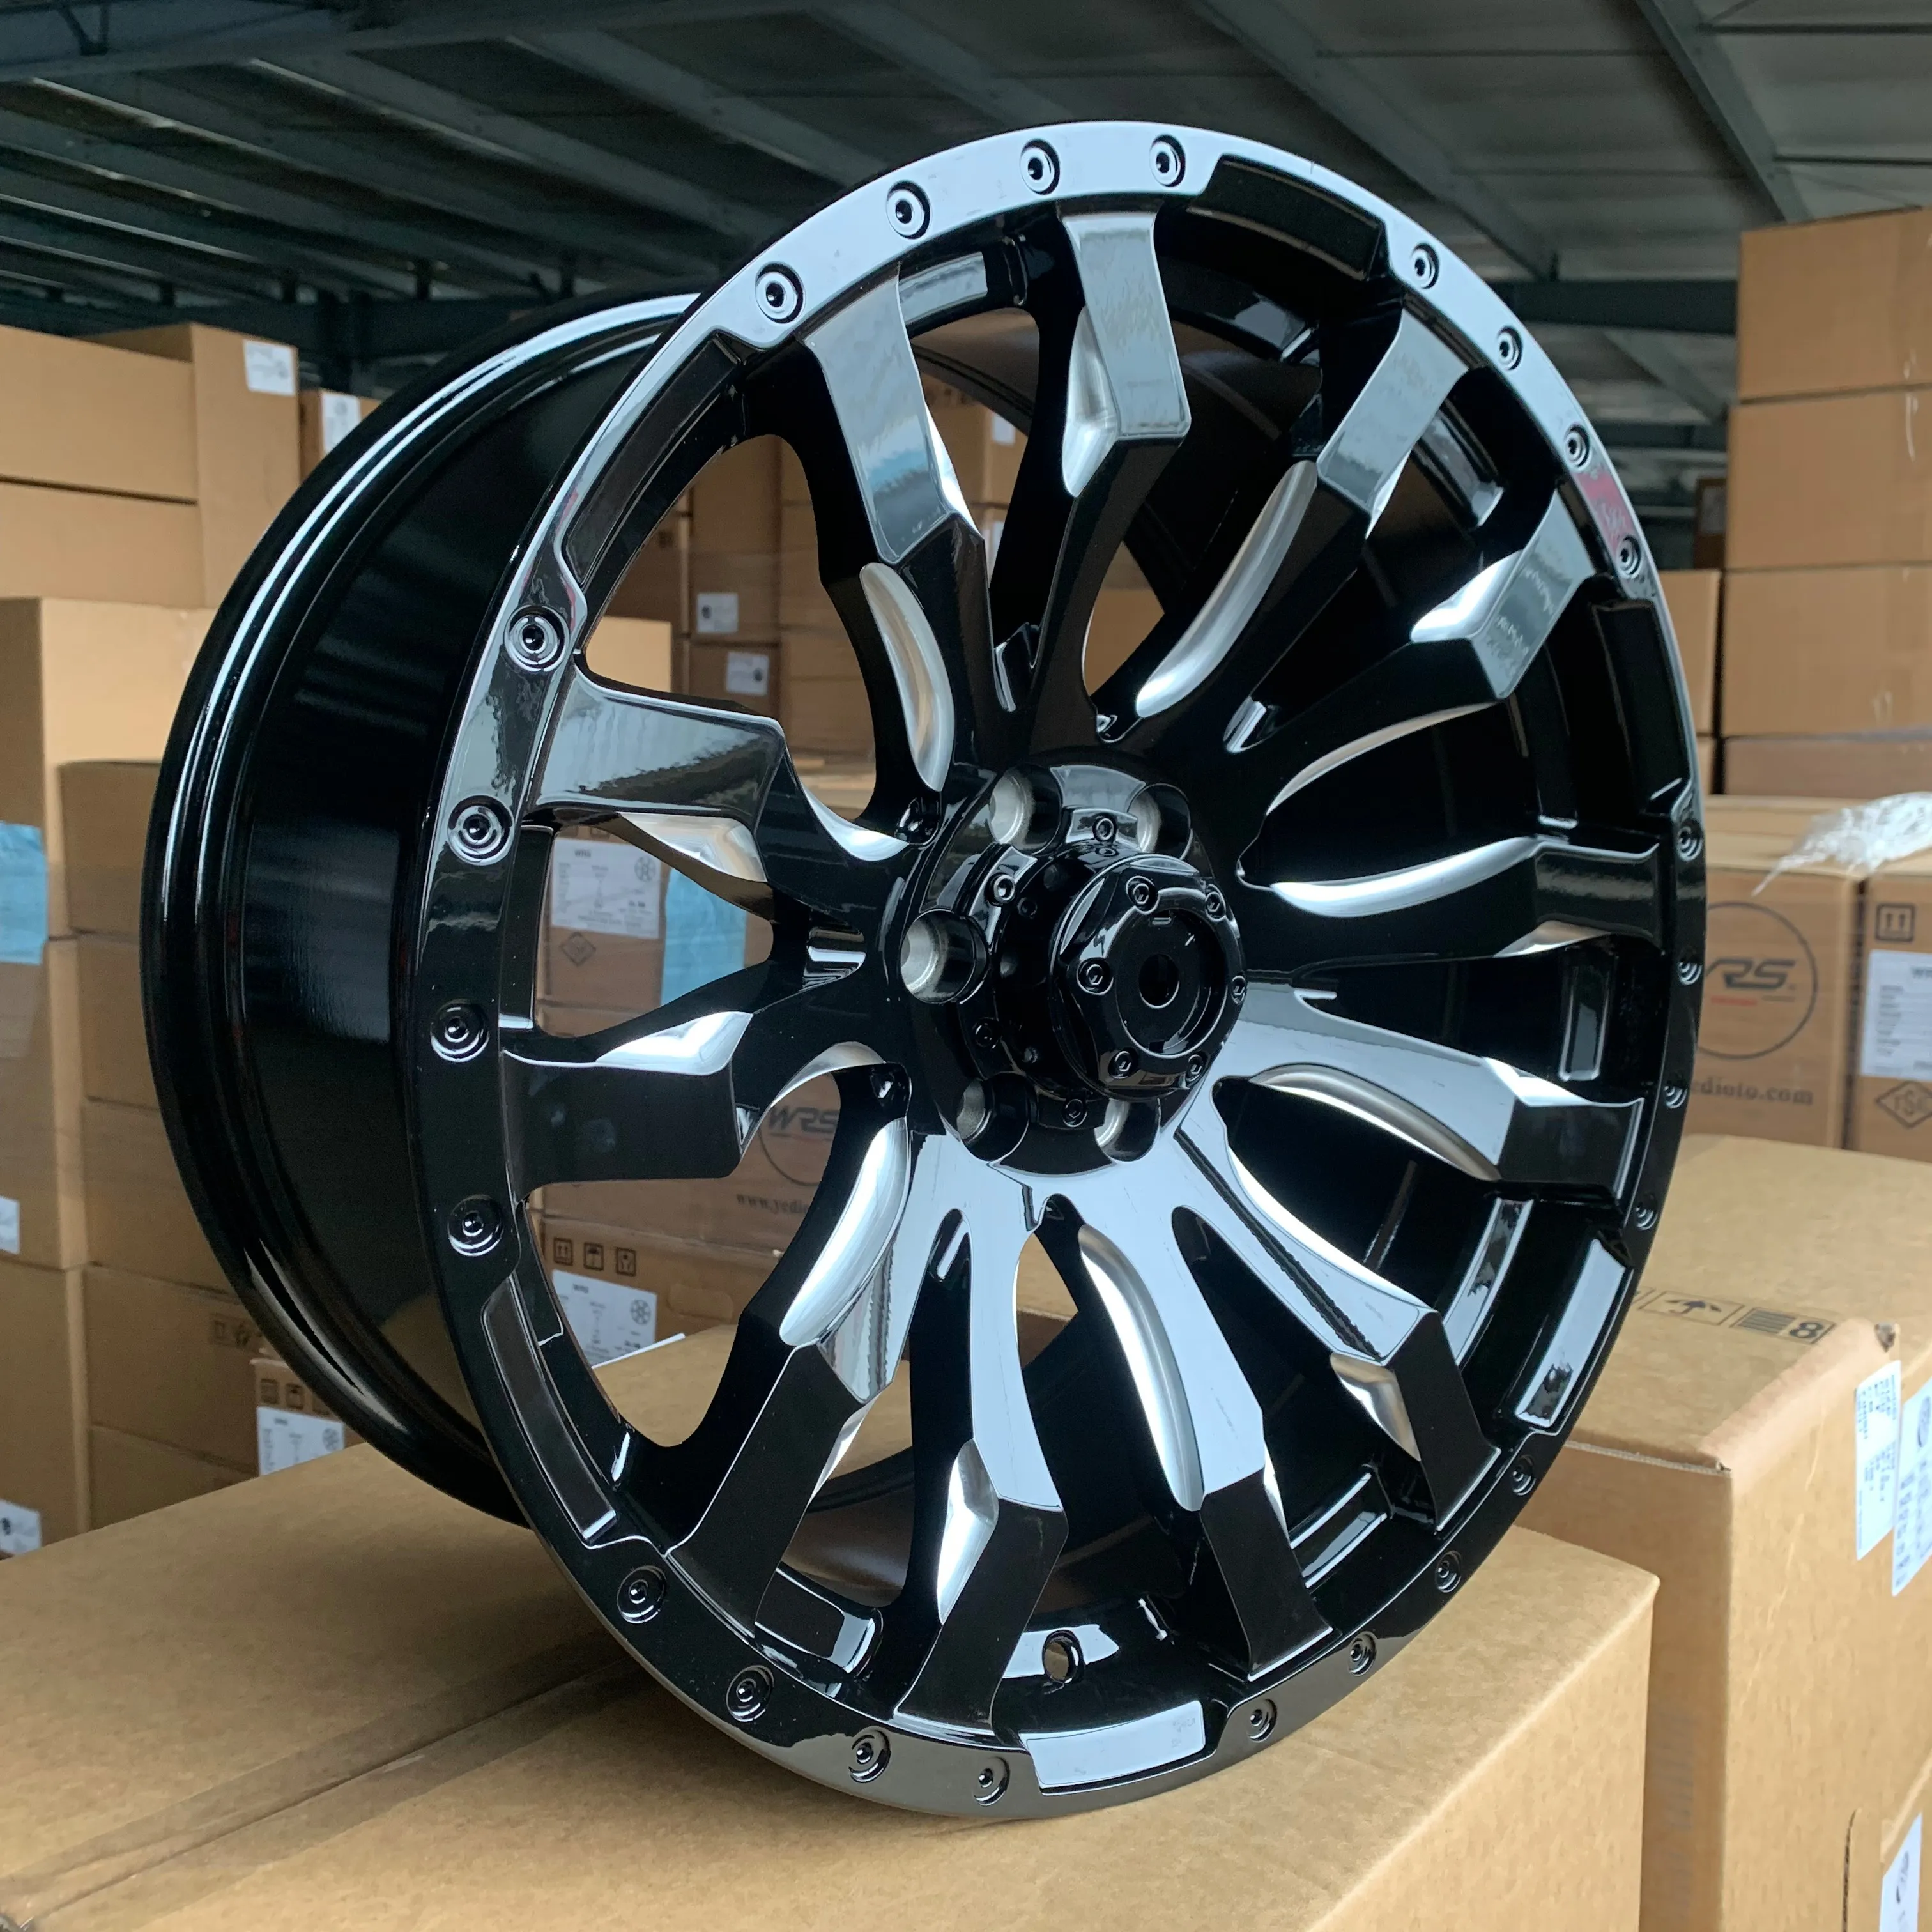 15 18 20 inch 6 lugs holes x 139.7 SUV 4x4 offroad Concave design alloy wheel Casting or Forged mags Aluminum passenger car rim